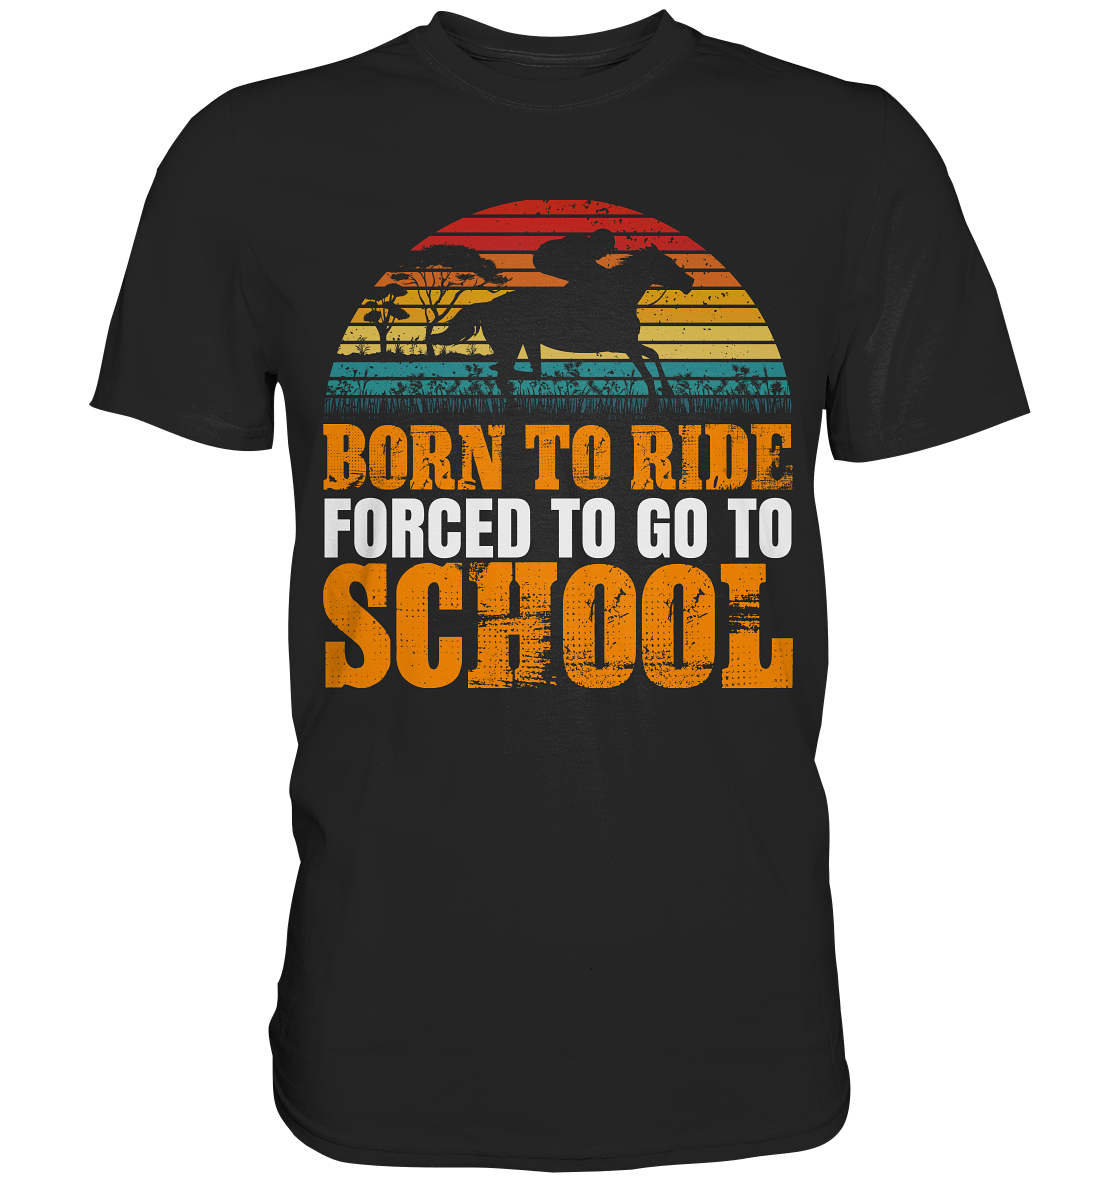 Born to ride. Forced to go to school. Pferde - Premium Shirt